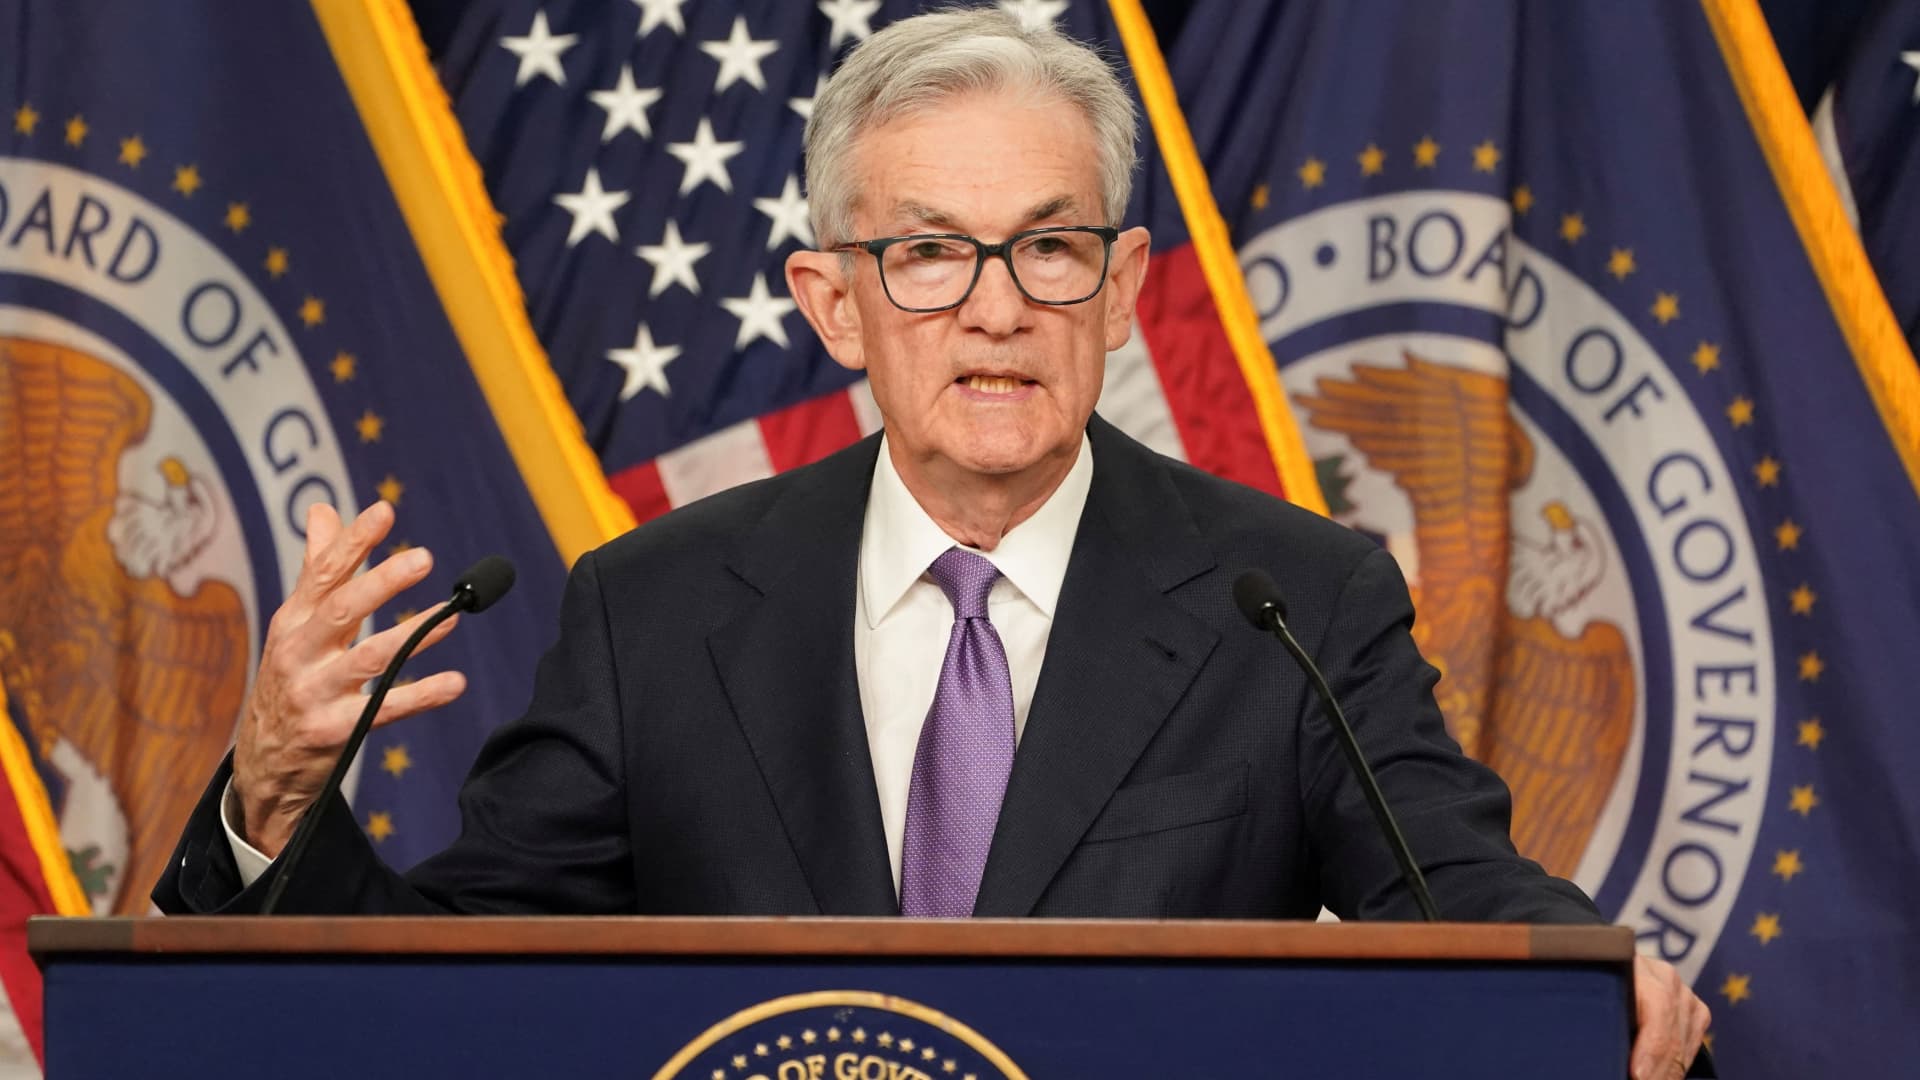 Powell says there has been a ‘lack of progress’ this year on inflation